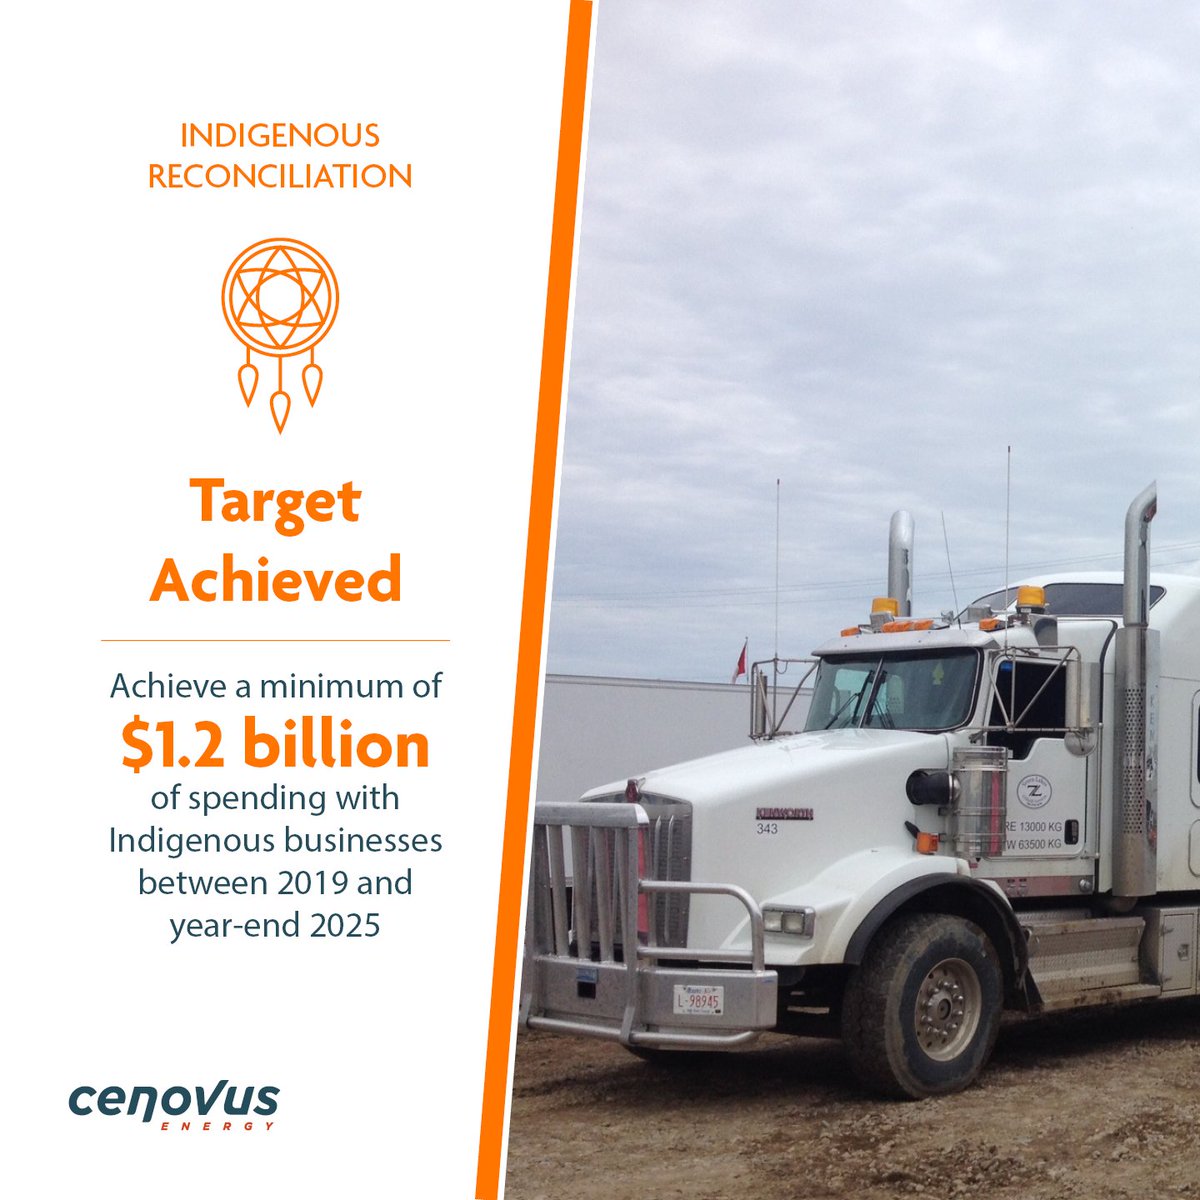 We’ve achieved our minimum Indigenous business spend target two years ahead of schedule. This is just one way we demonstrate our commitment to advancing Indigenous reconciliation. Learn more in about our Indigenous reconciliation efforts: bit.ly/3JgSbSZ #Cenovus #ESG